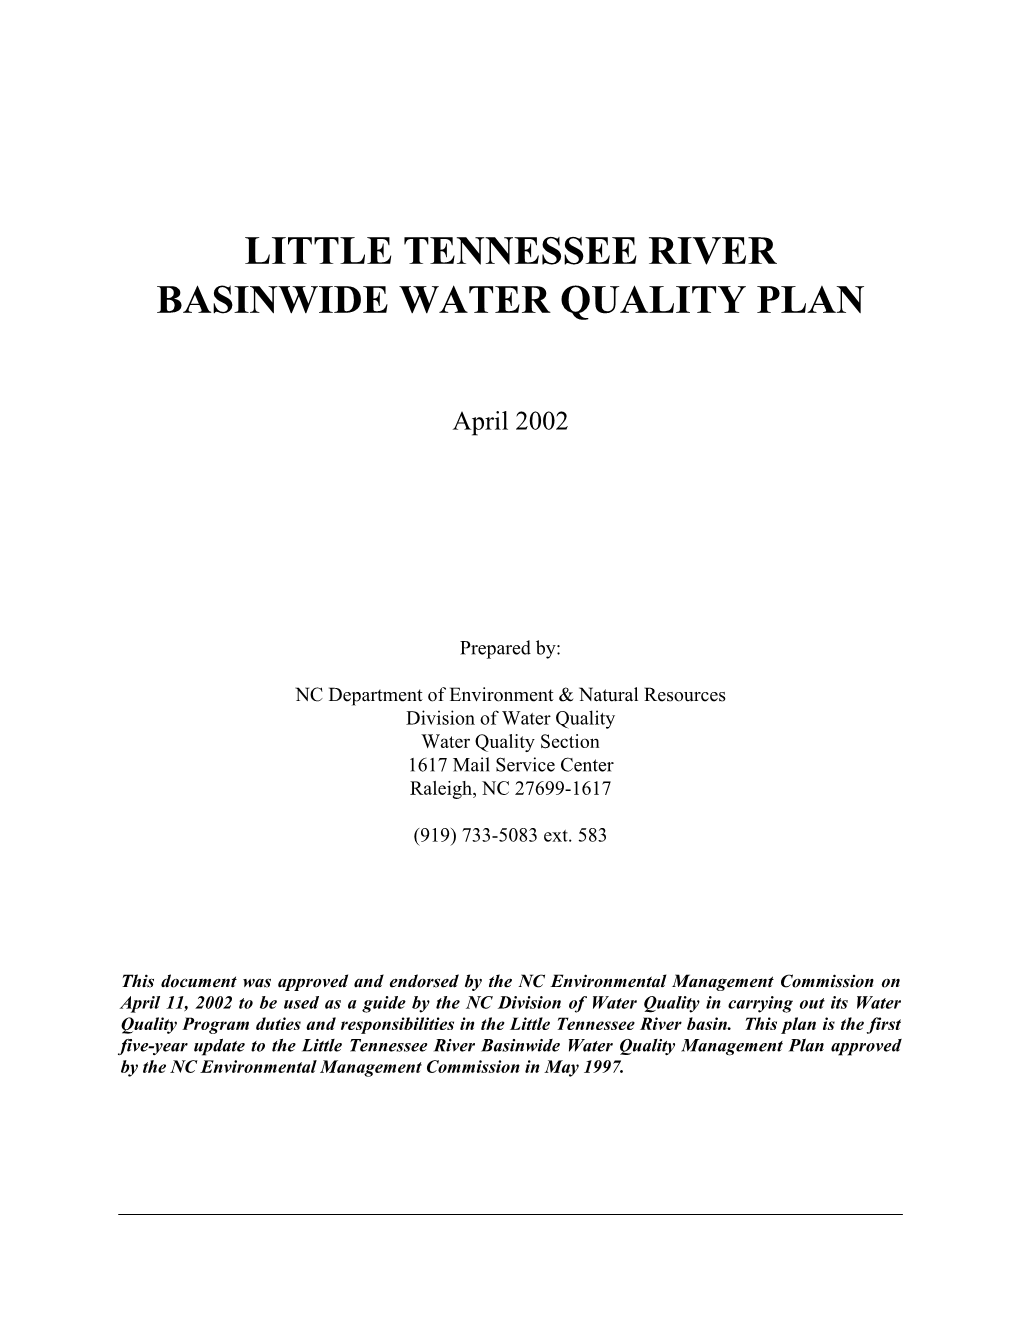 Little Tennessee River Basinwide Water Quality Plan